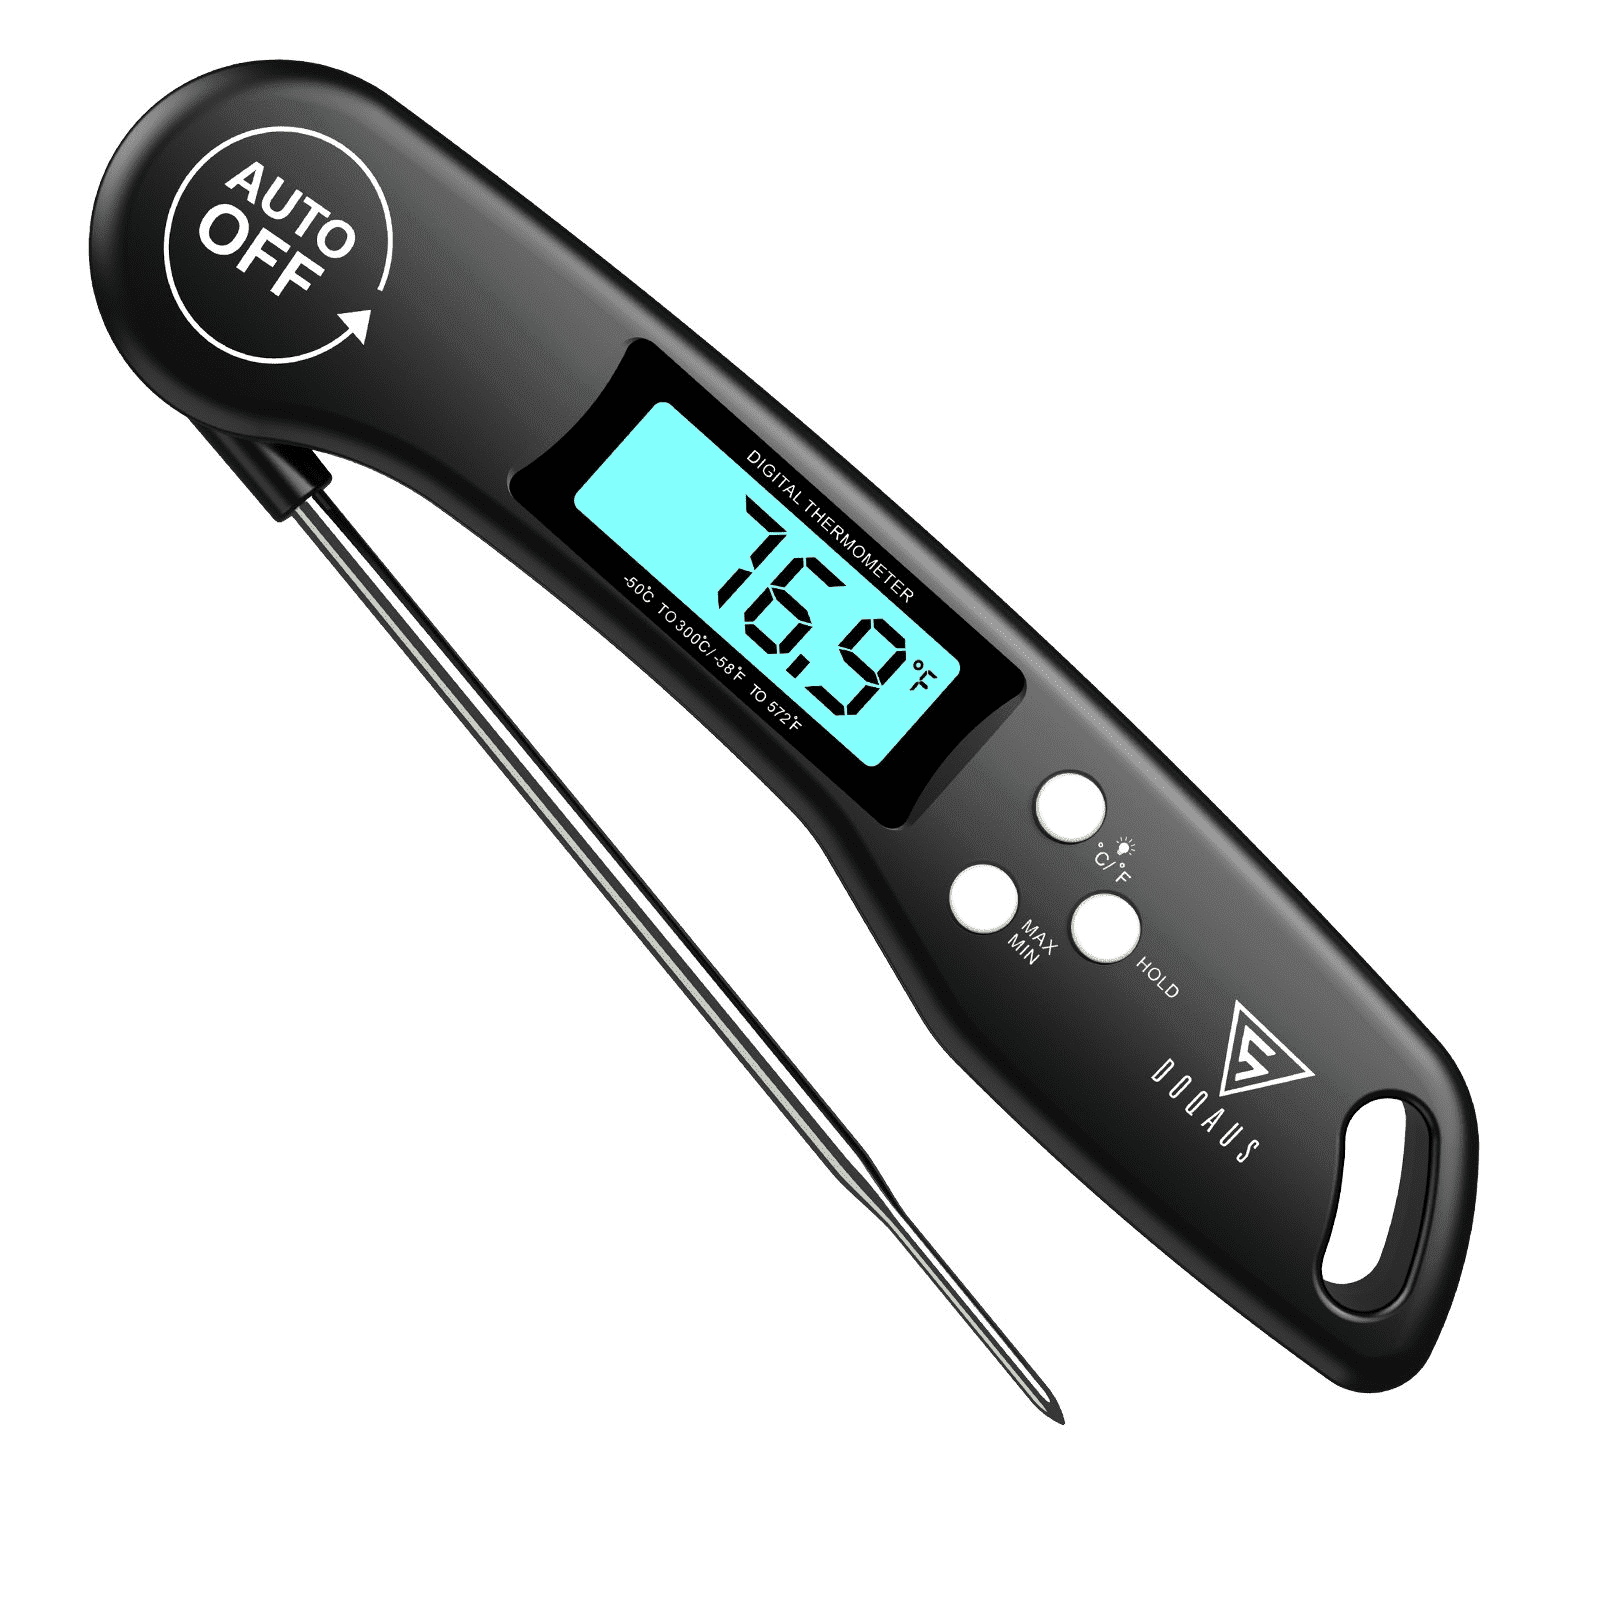  BBQ Dragon Wireless Digital Meat Thermometer, Instant Read Food  Thermometer for Cooking, – Oven Safe Kitchen with 2 Probes, Meat  thermometers for Smokers.: Home & Kitchen